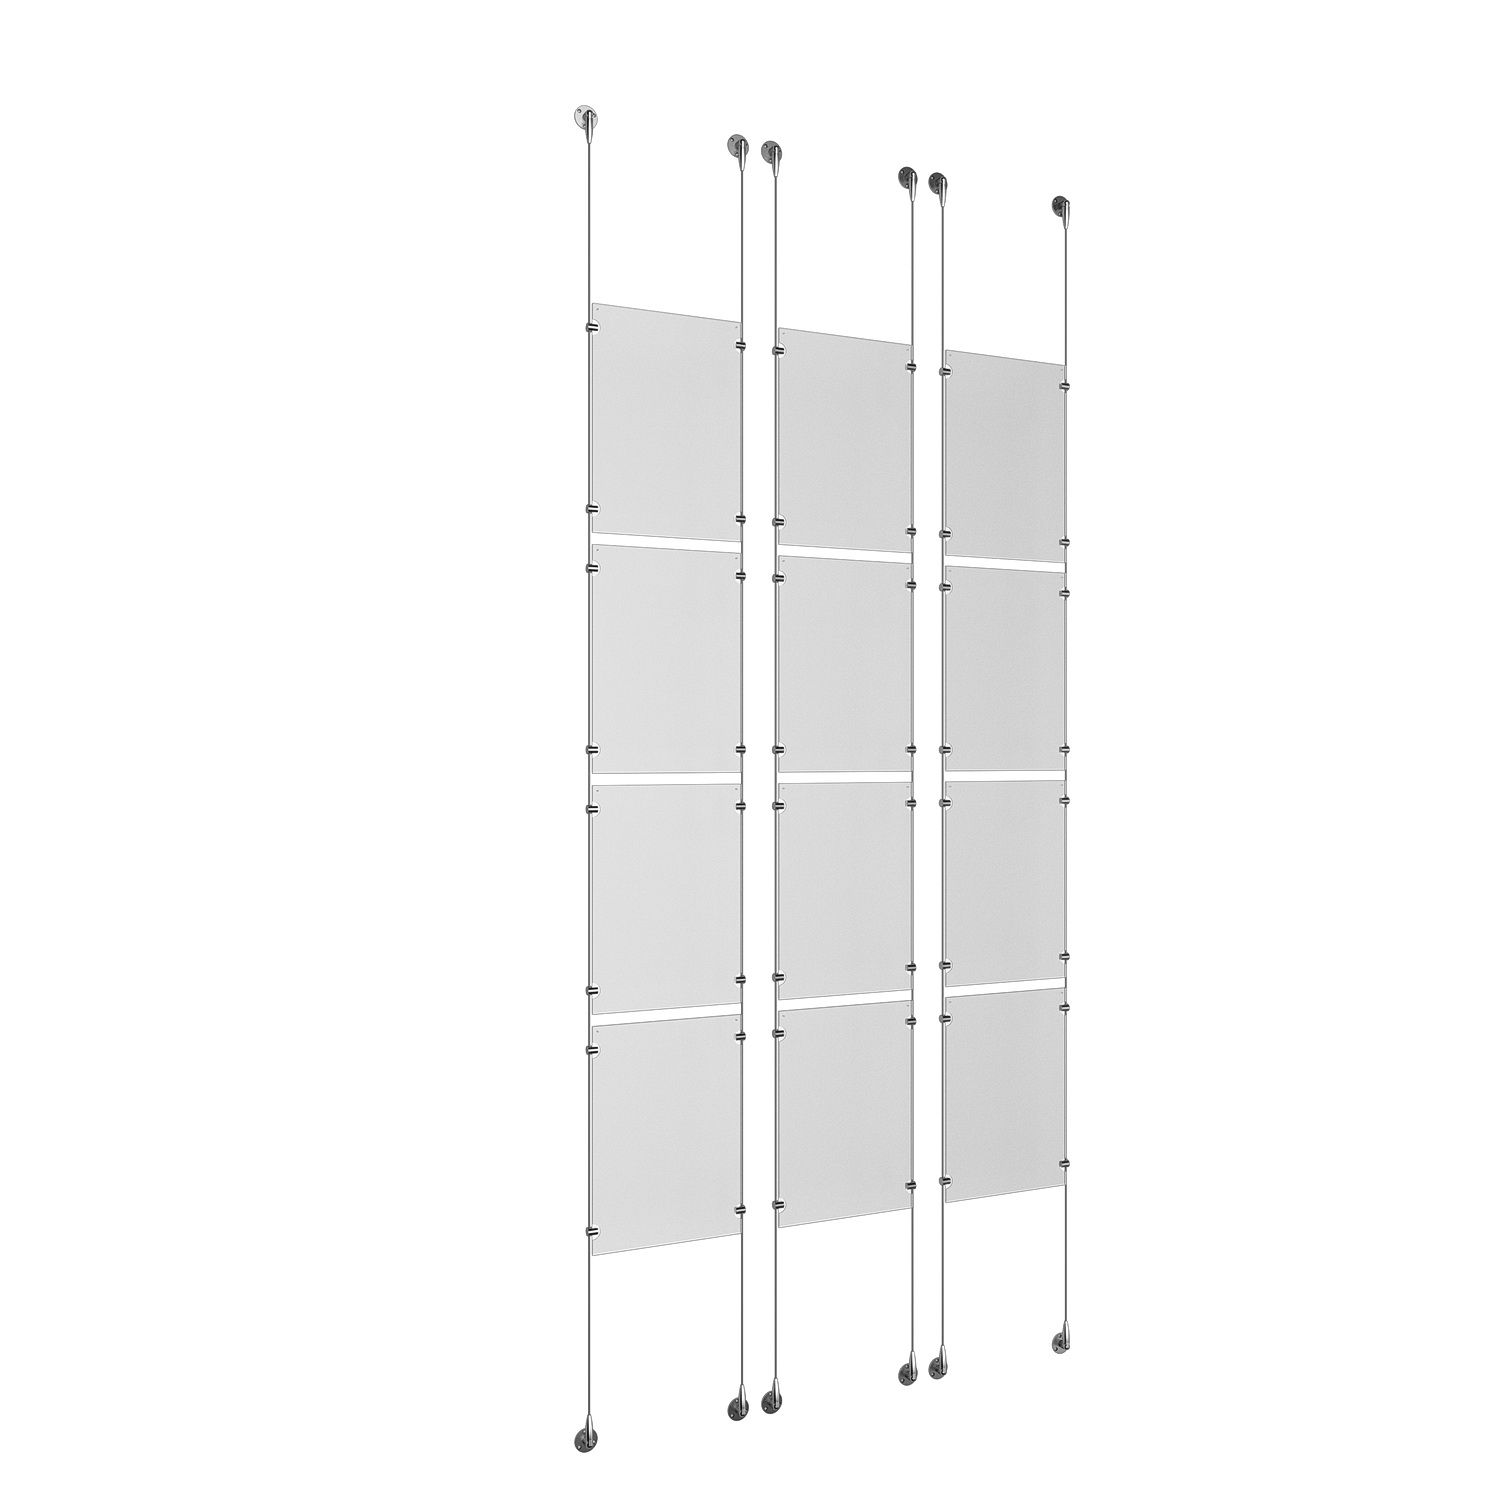 (12) 11'' Width x 17'' Height Clear Acrylic Frame & (6) Stainless Steel Satin Brushed Adjustable Angle Signature 1/8'' Cable Systems with (48) Single-Sided Panel Grippers